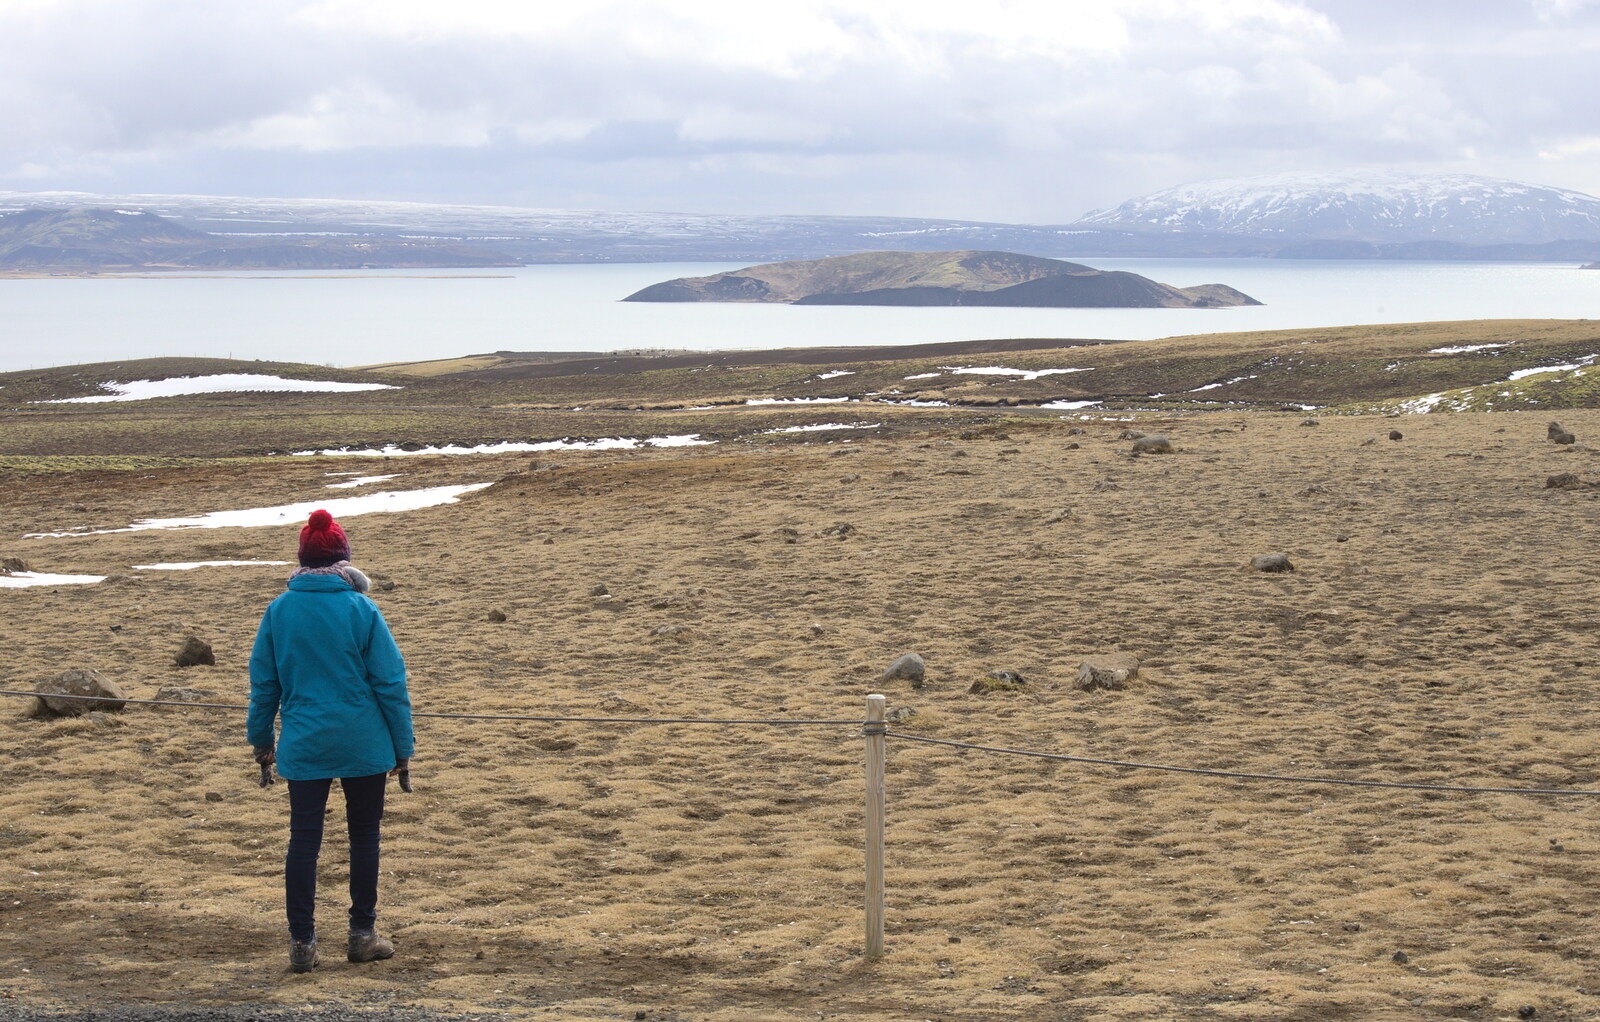 Isobel looksout over a lake from The Golden Circle of Ísland, Iceland - 22nd April 2017